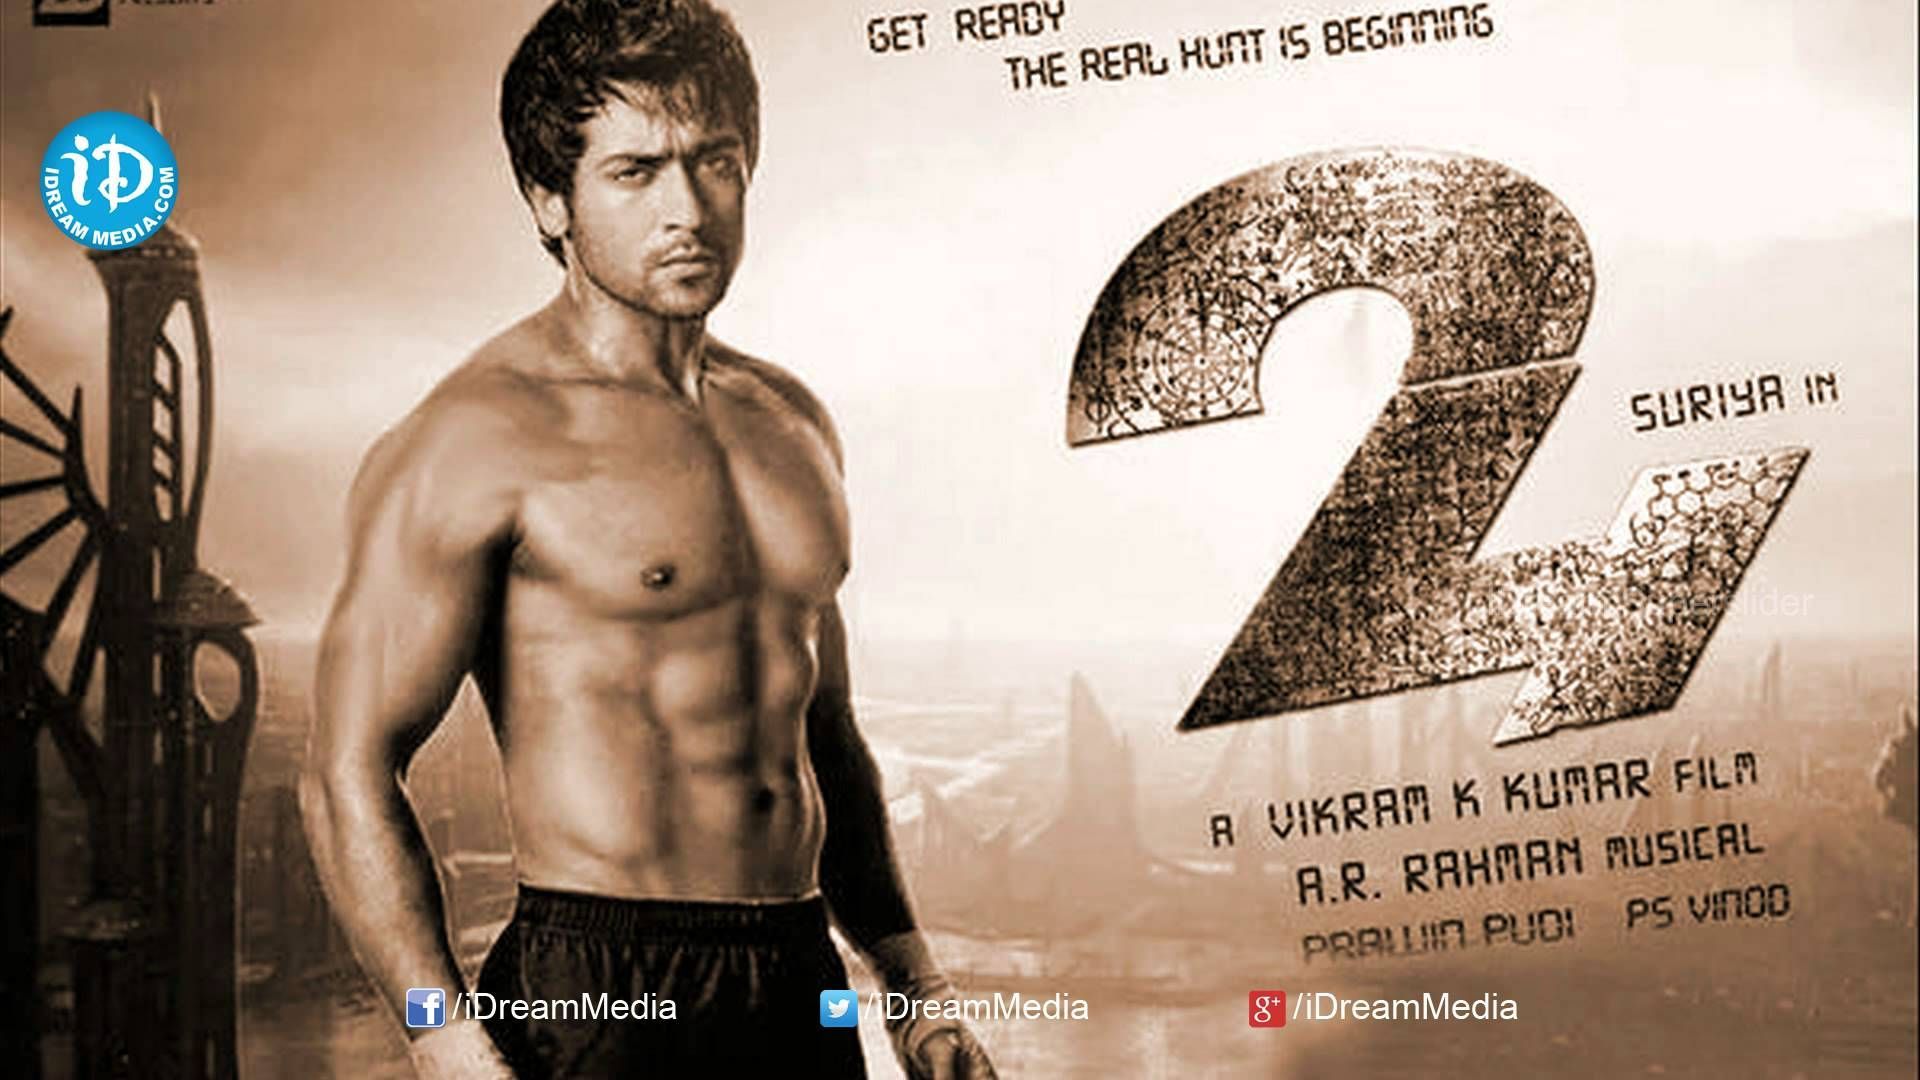 Surya's new role of 24. Surya actor, Tamil movies, Film